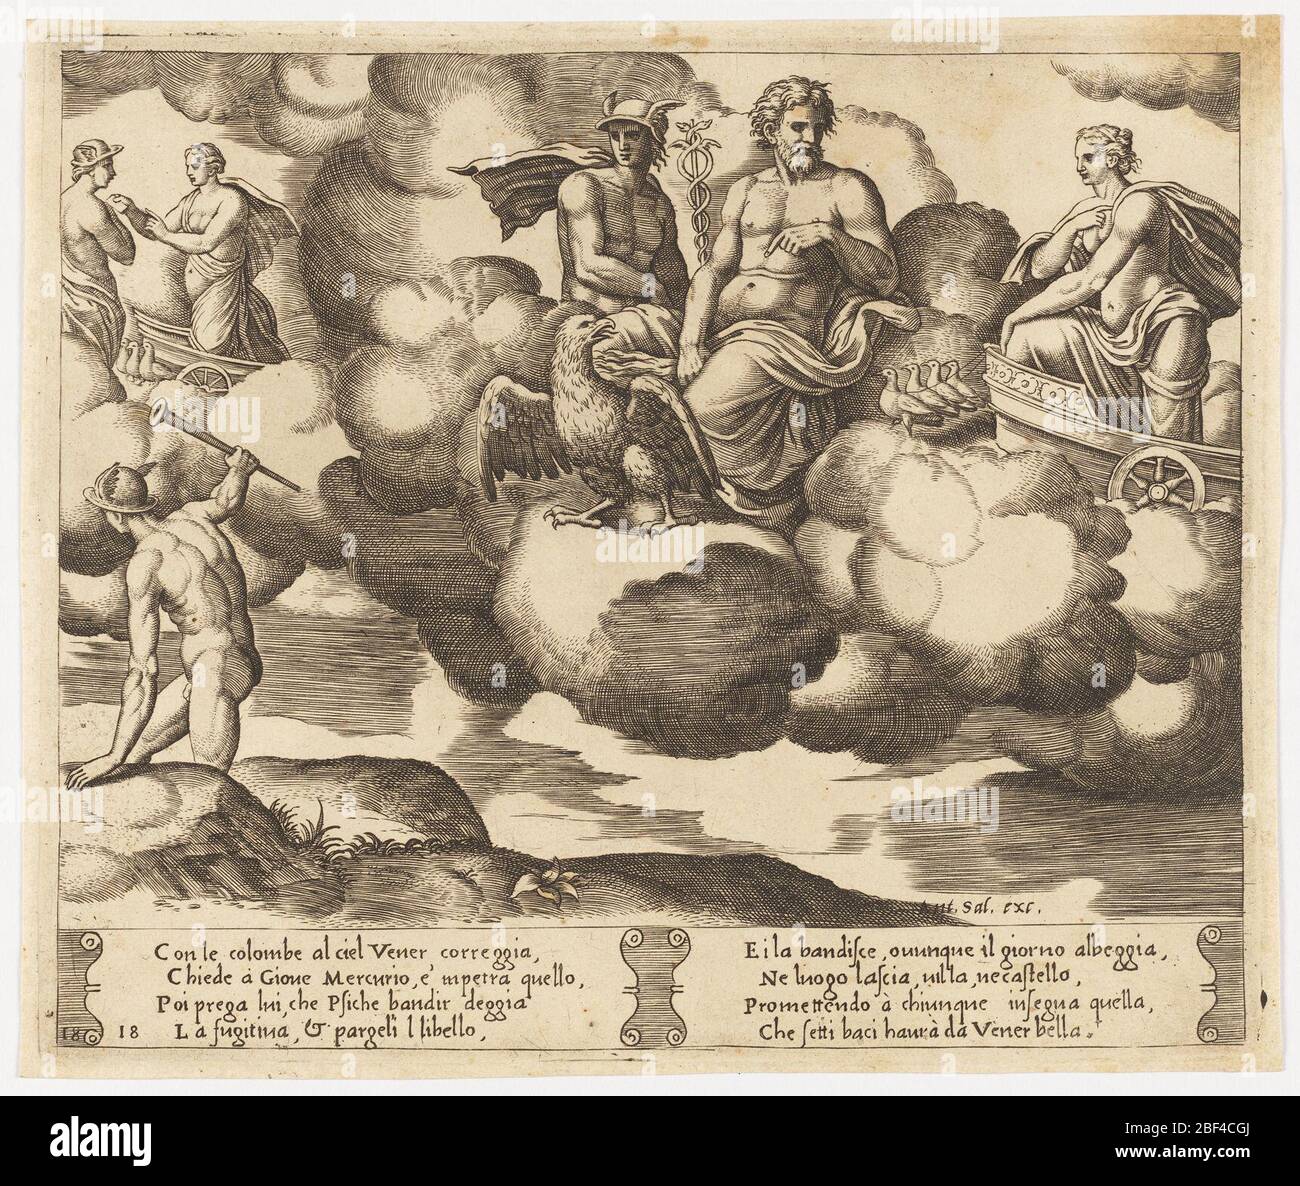 Venus Complains to Jupiter. Among clouds, Jupiter sits at center, with an eagle before him, Hermes at left with winged helmet and staff. Venus arrives from right on a chariot, preceded by doves. Behind them, to the left, Venus converses with Hermes. Stock Photo